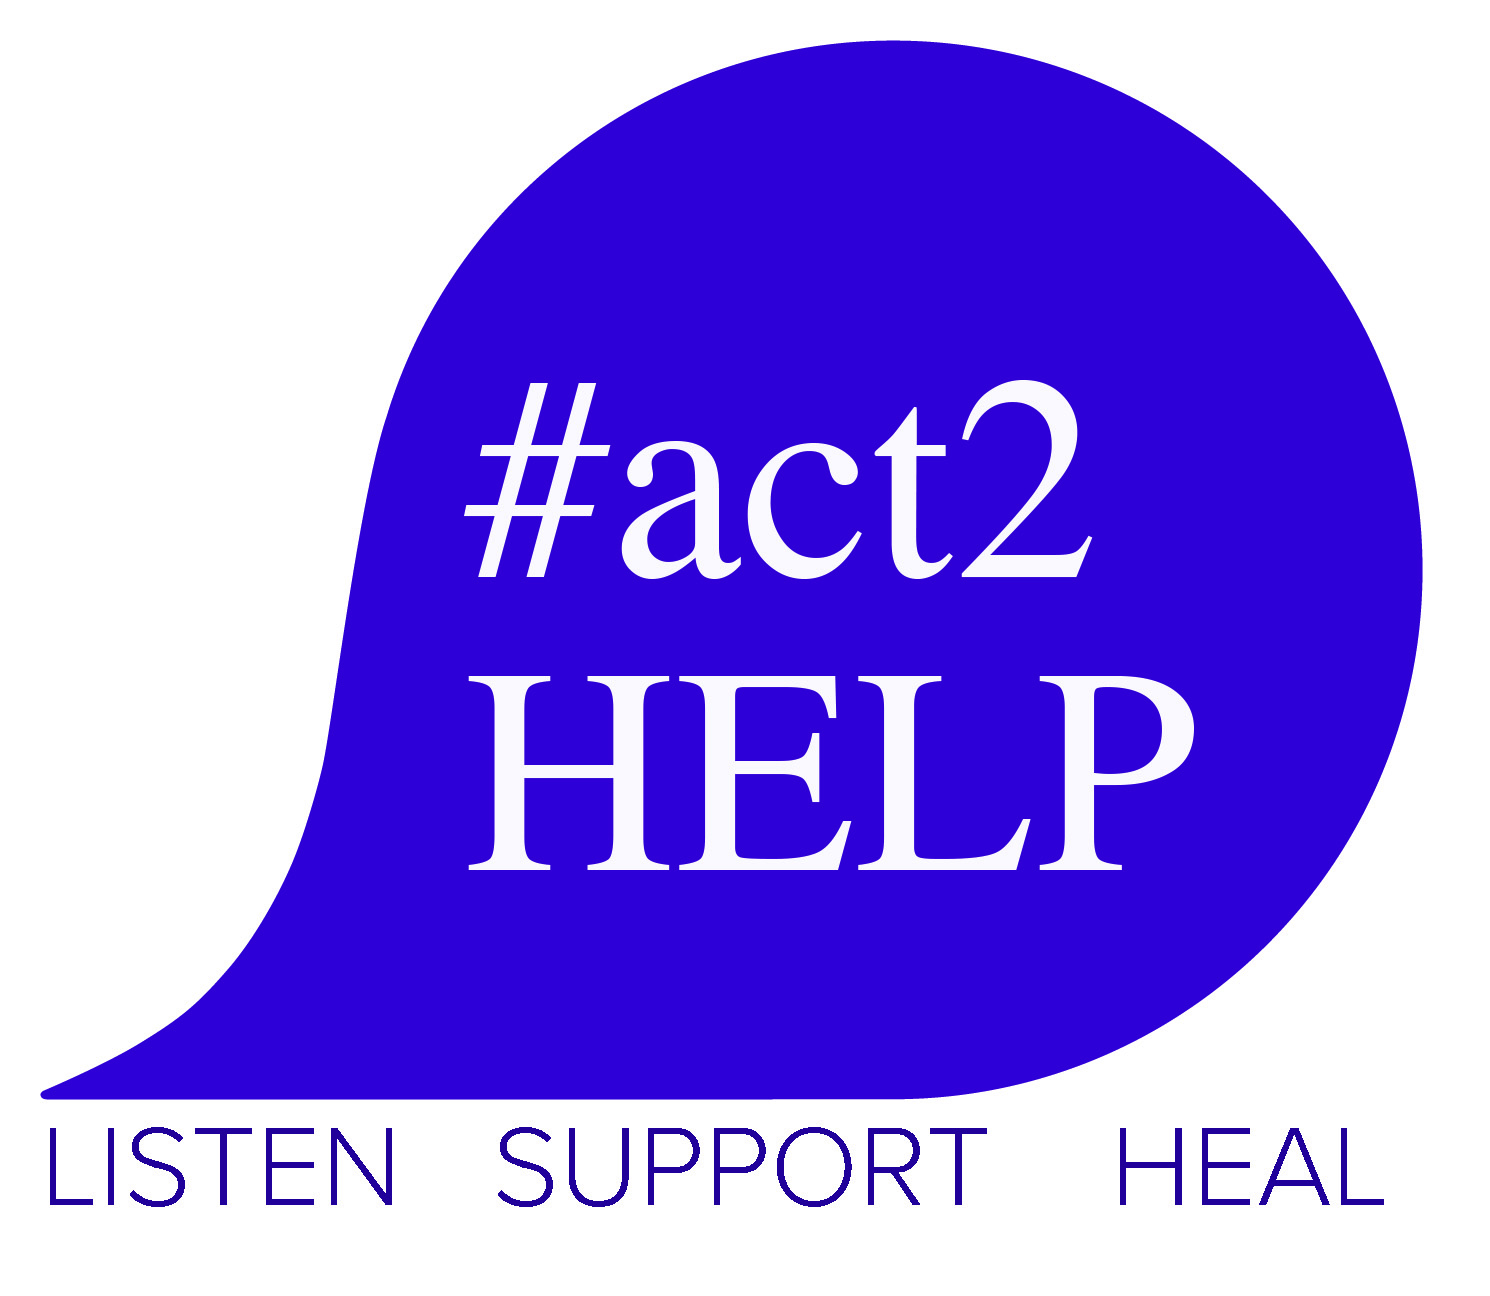 We need your marketing planning skills for our #act2HELP Campaign 